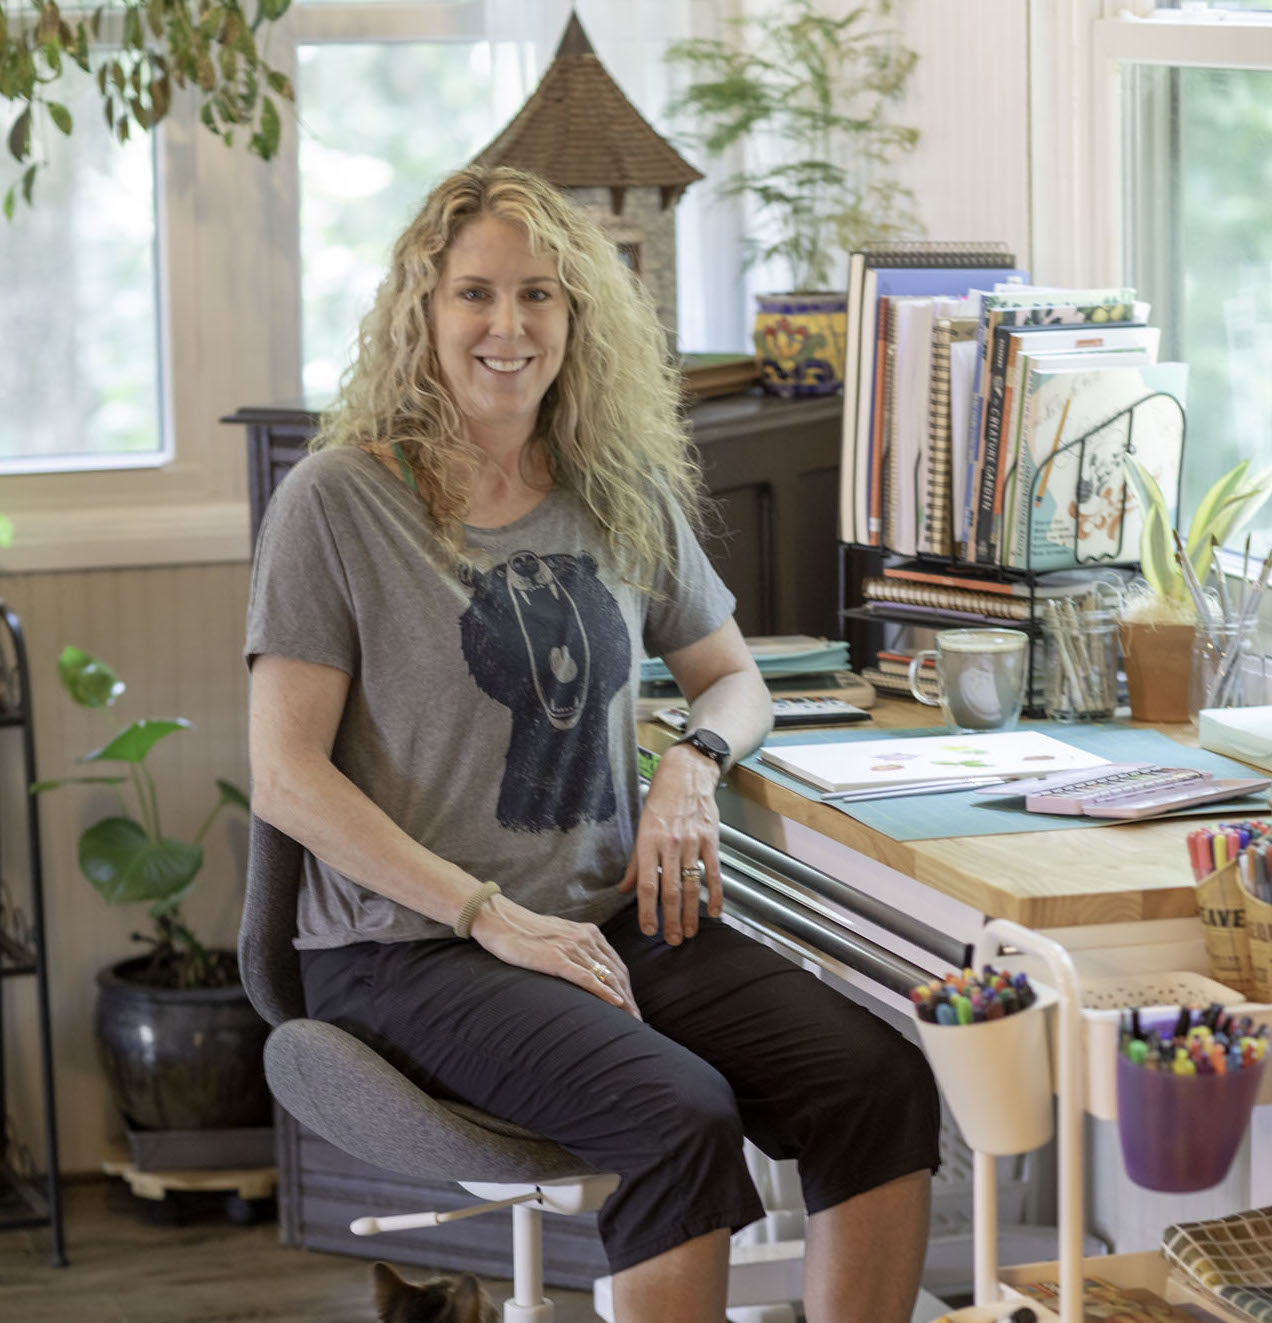 A photo of artist Lisa Petrillo in her studio in North Georgia sitting at a desk with art supplies, a painting, and plants in the background.